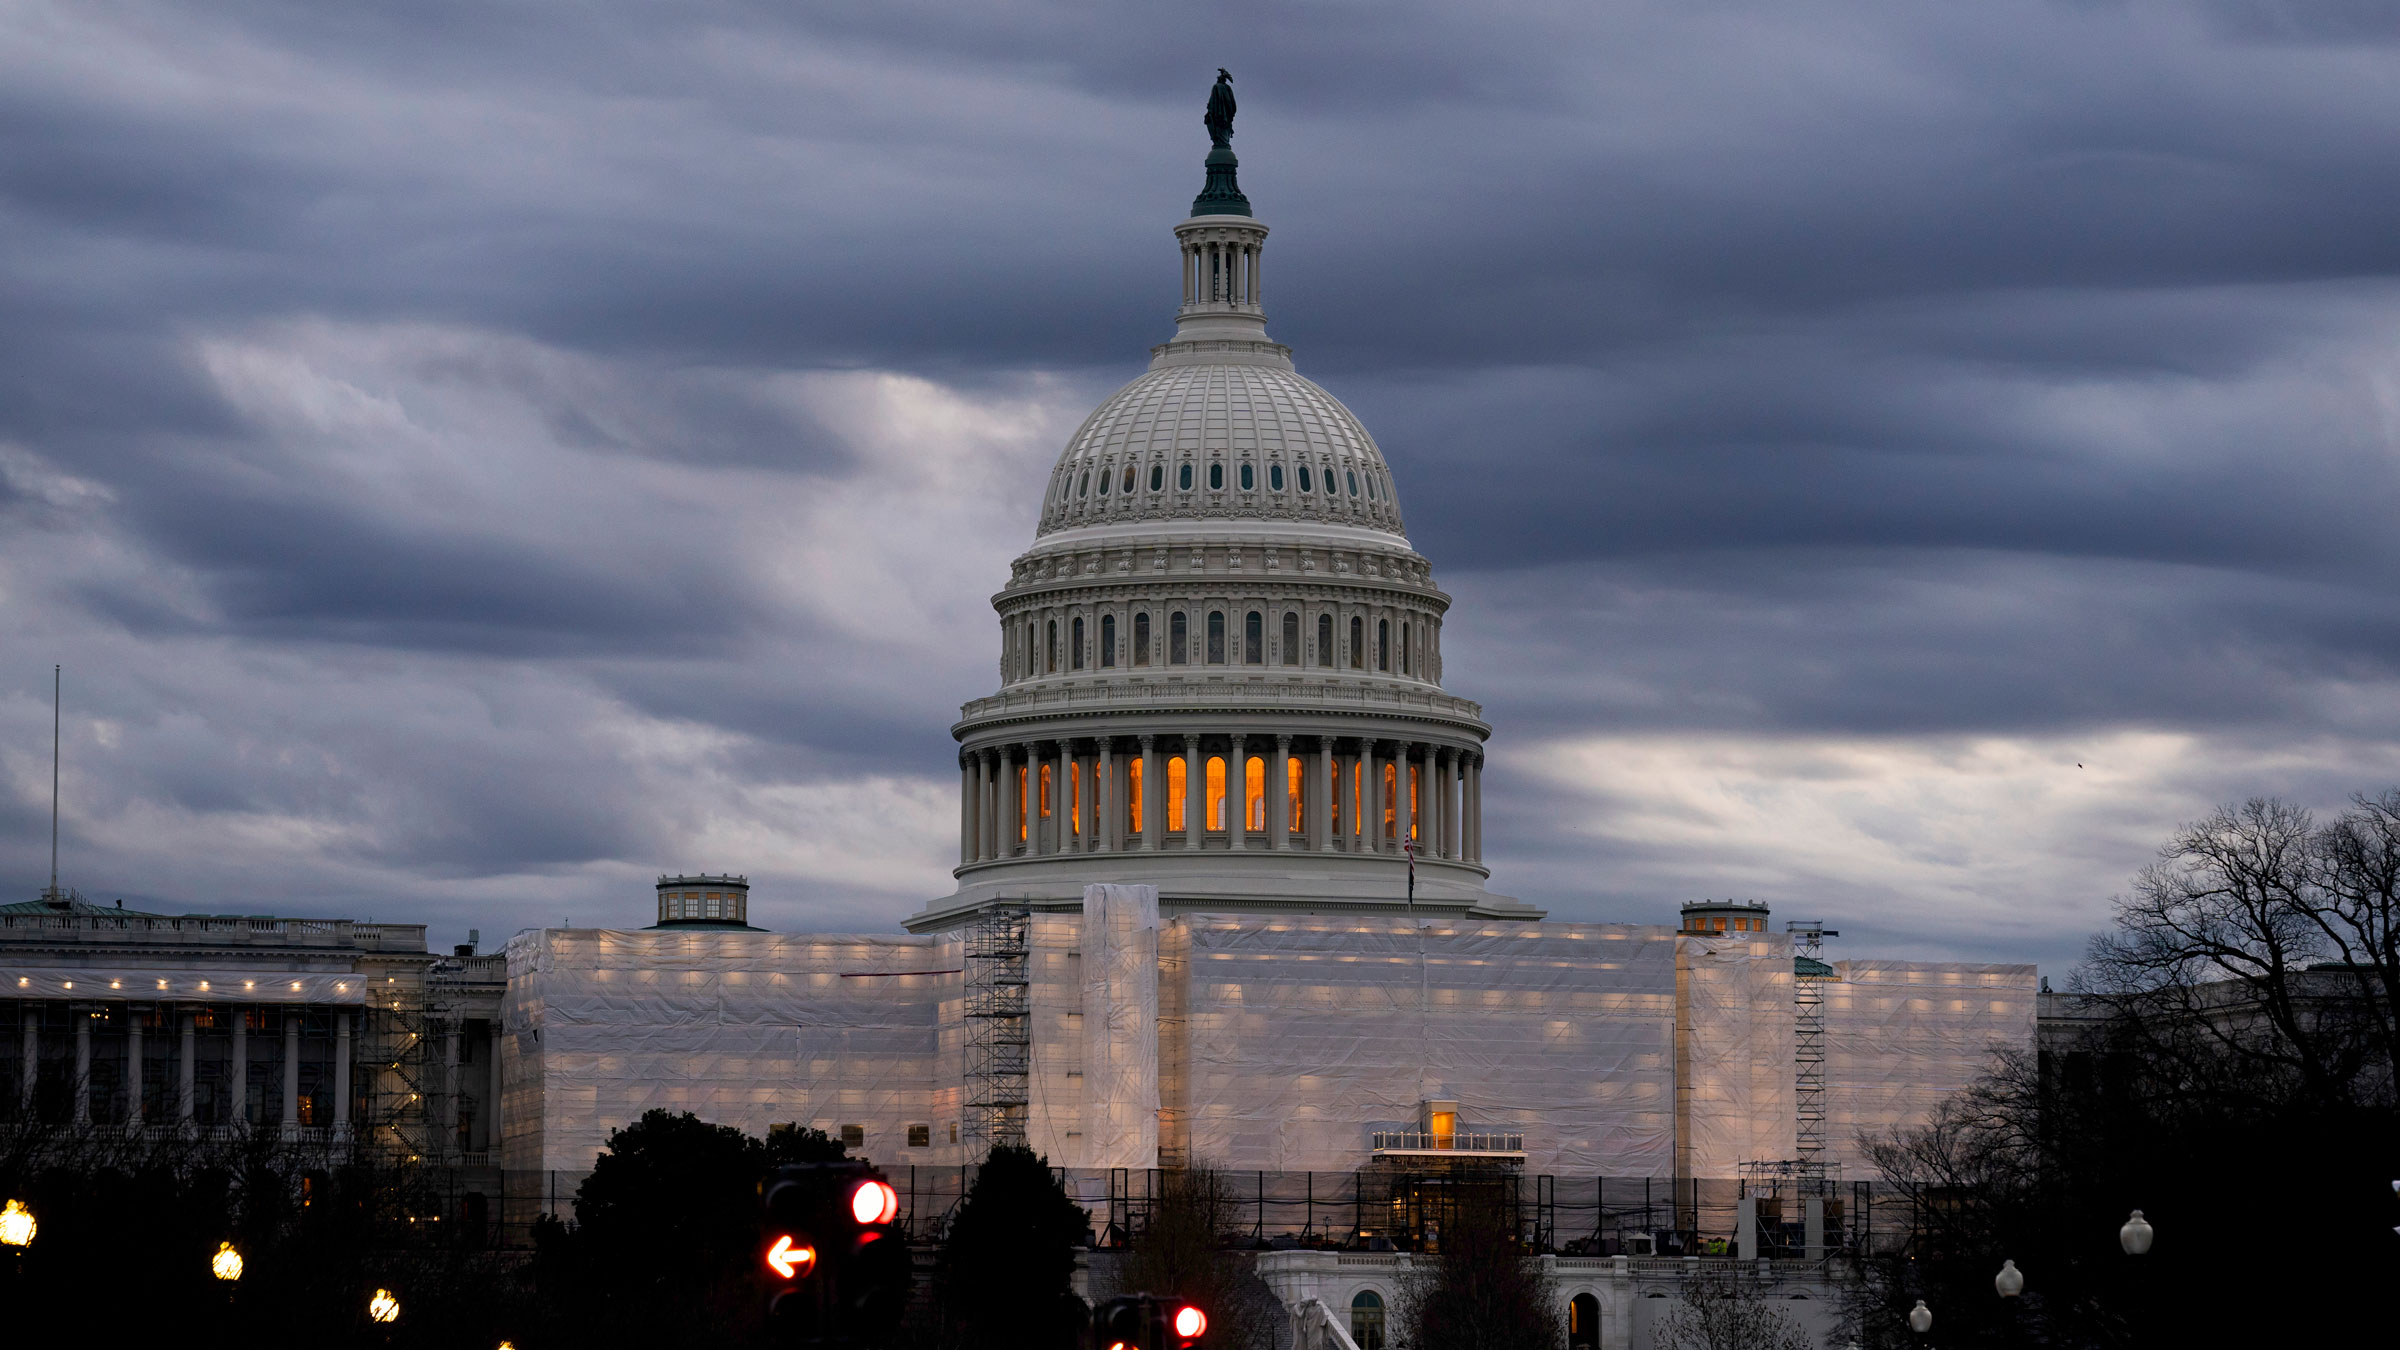 The Capitol is seen amid cloudy skies early on Thursday.